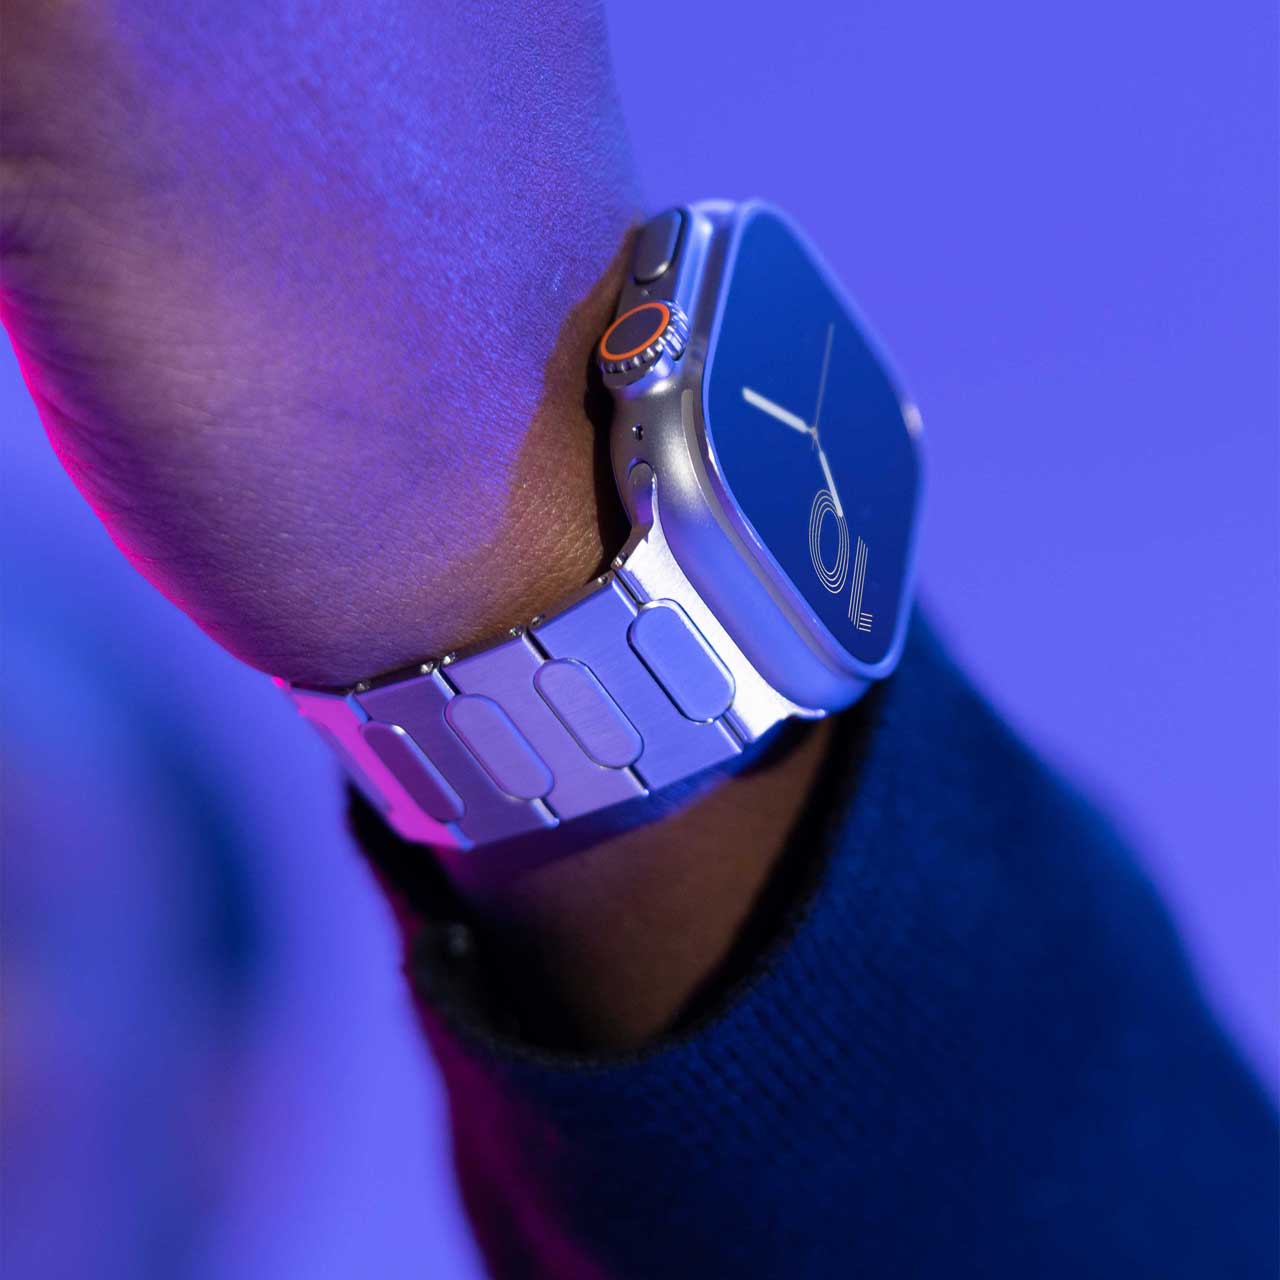 Turn Apple Watch into high-end jewelry with this band